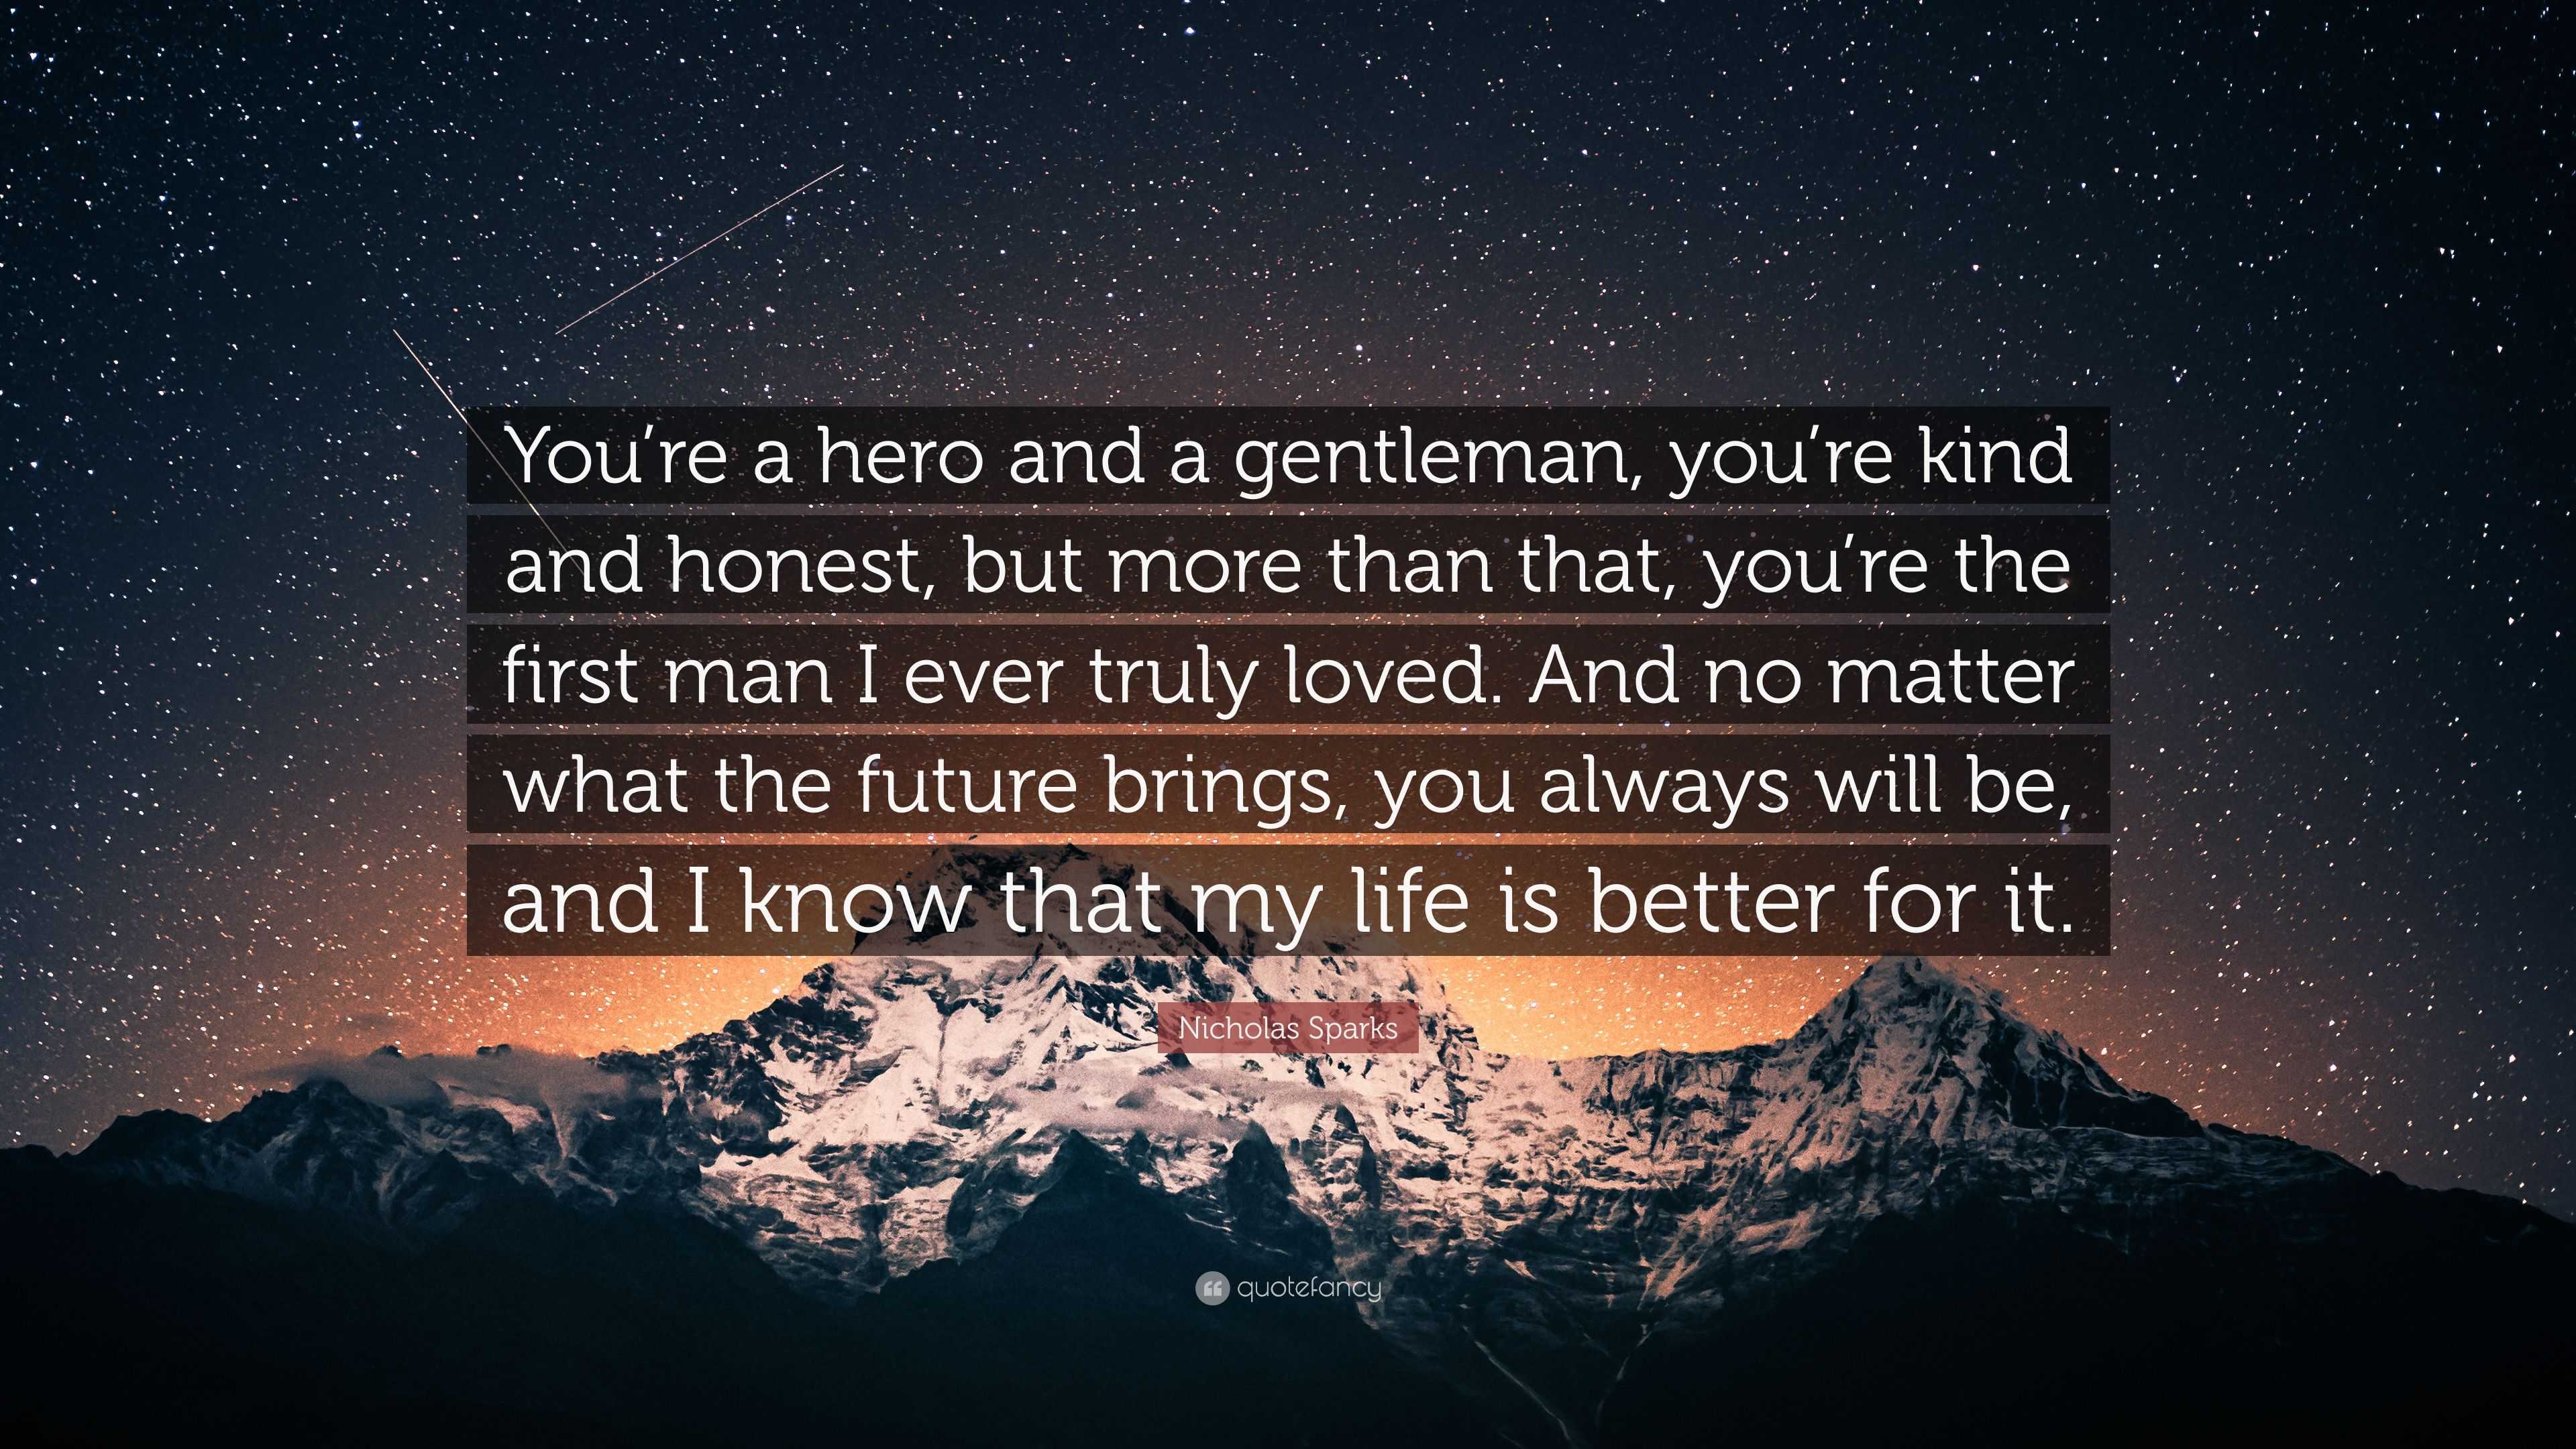 Nicholas Sparks Quote: "You're a hero and a gentleman, you ...